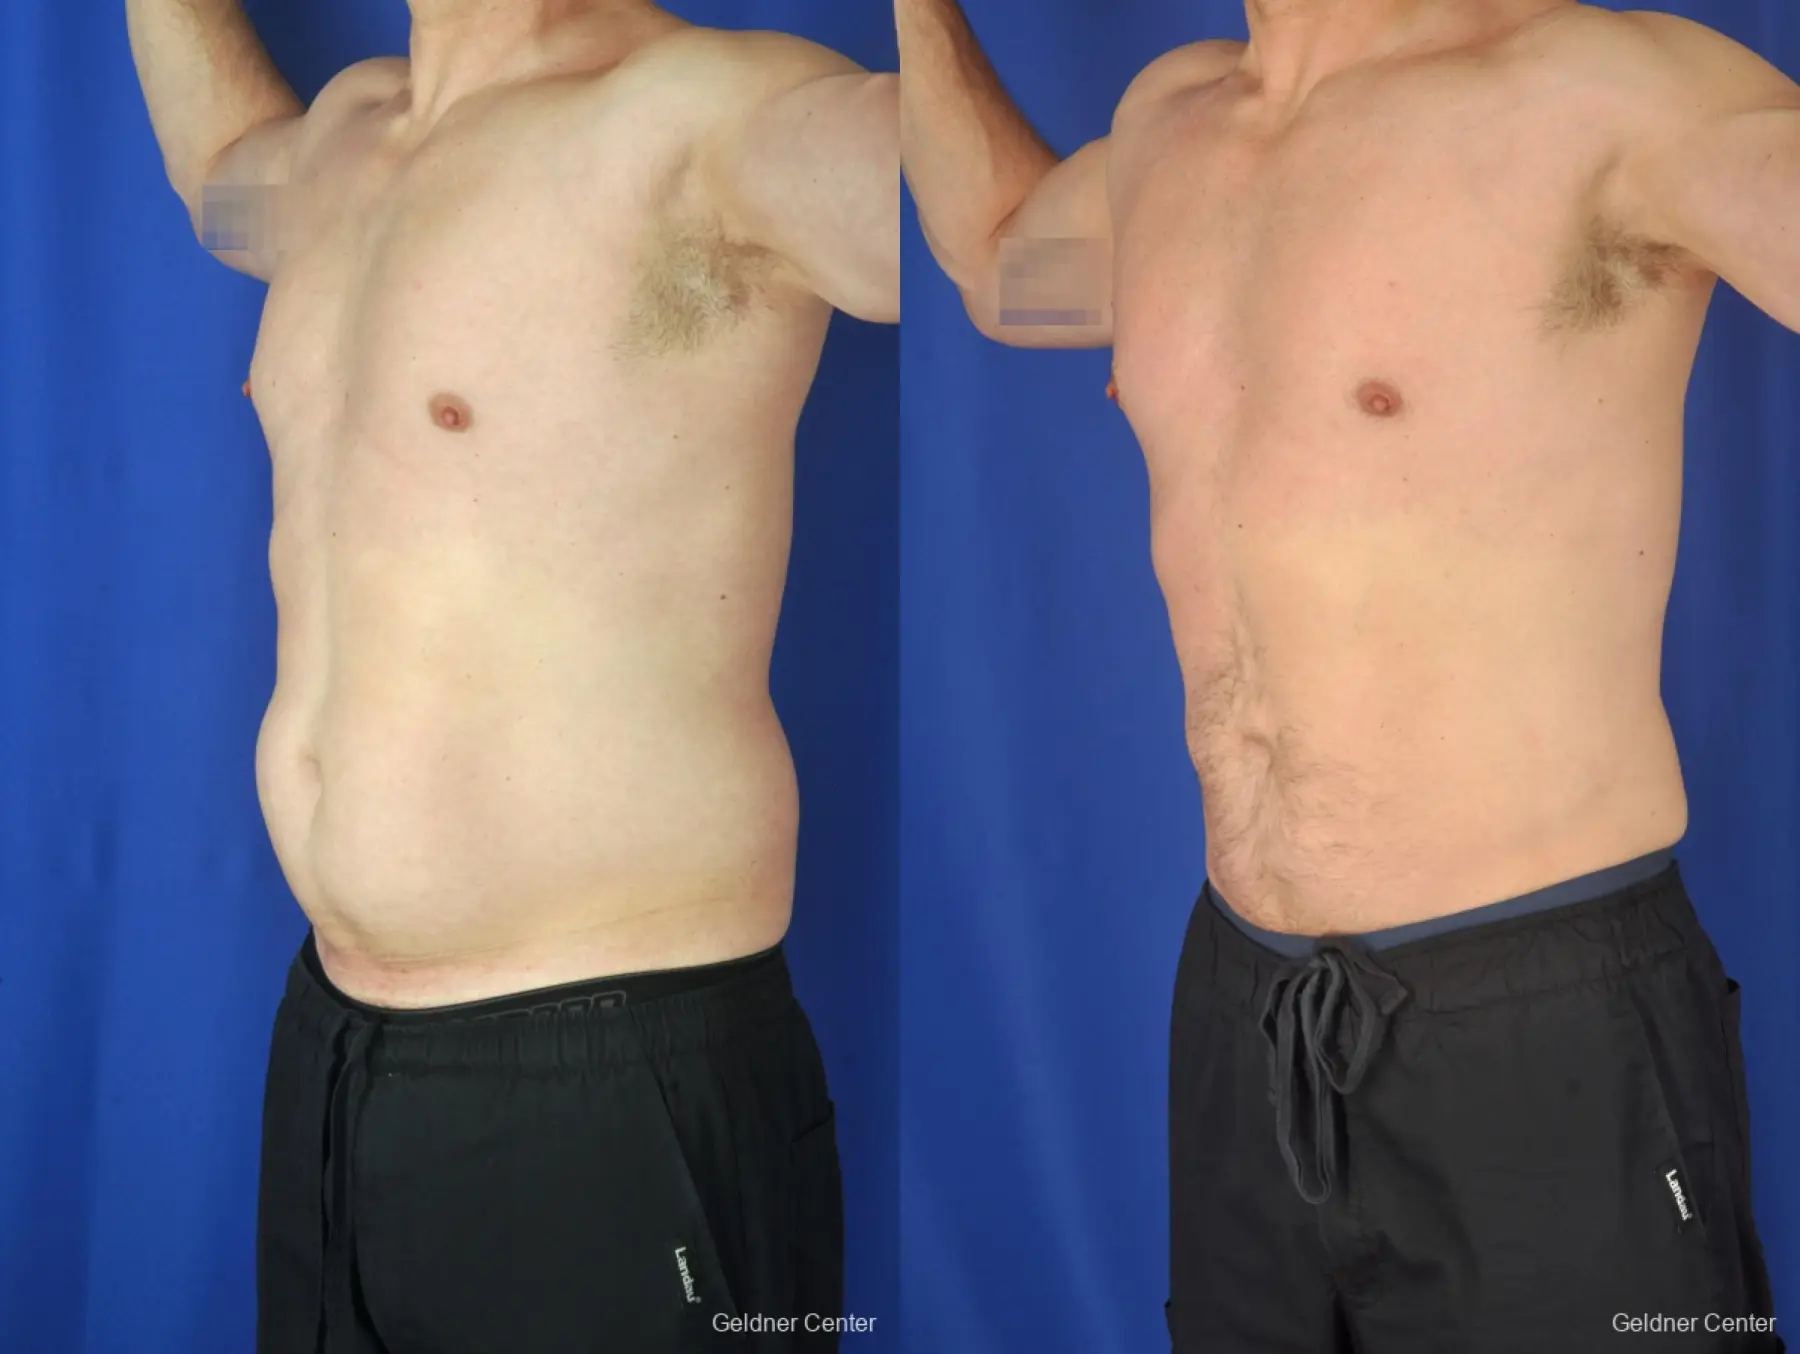 Liposuction For Men: Patient 9 - Before and After 5